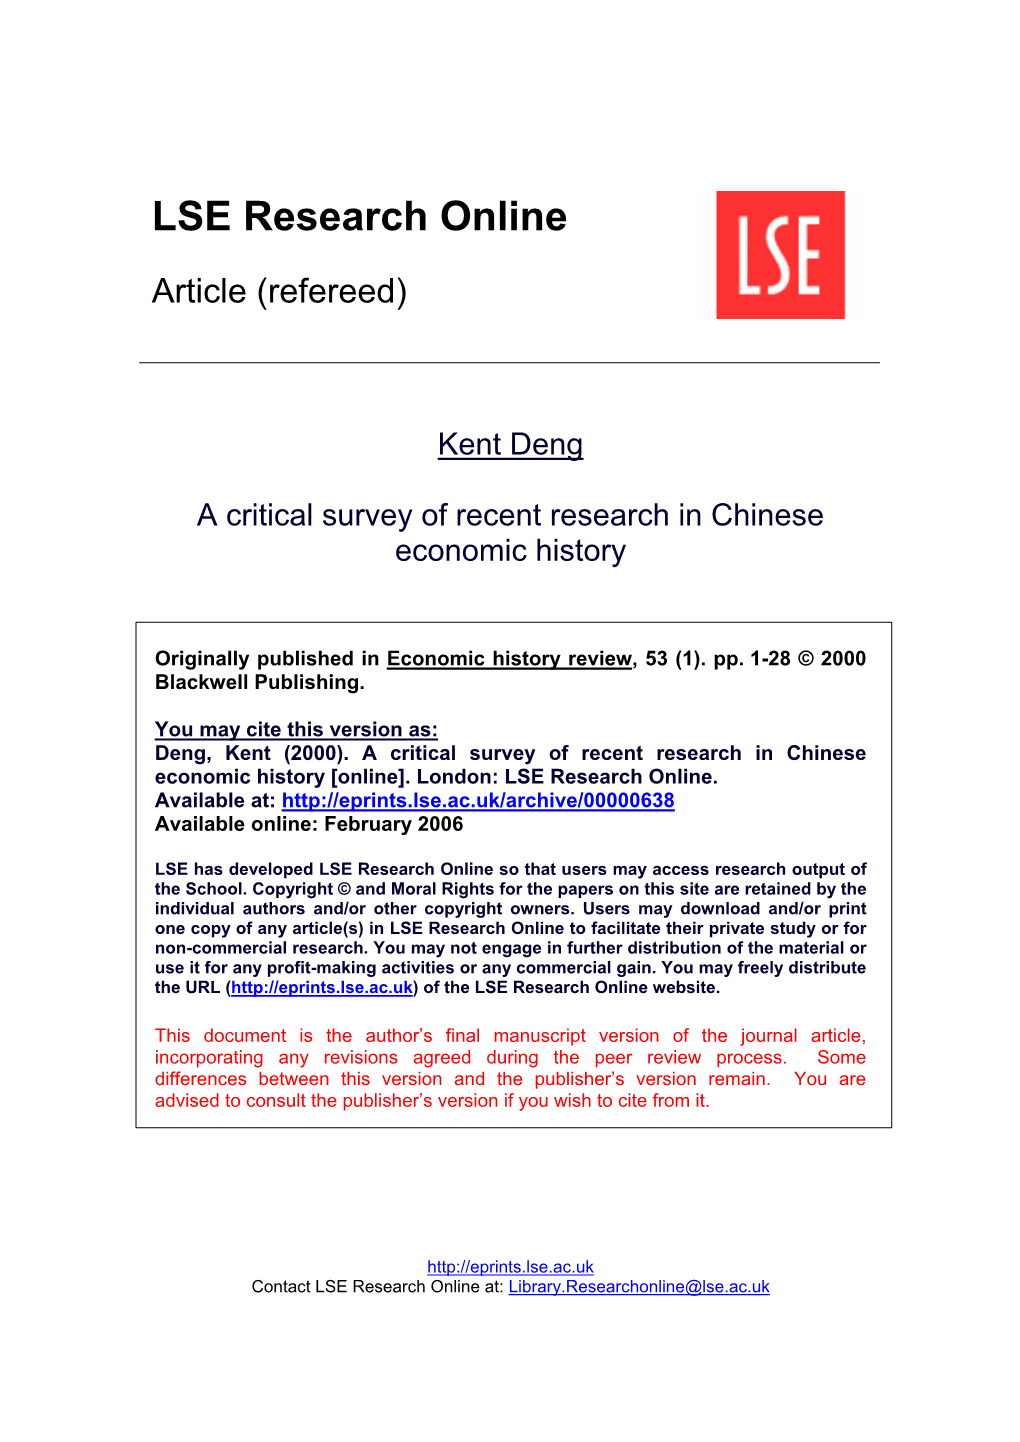 Surveys in Bibliography of Chinese Economic History and Criticism*